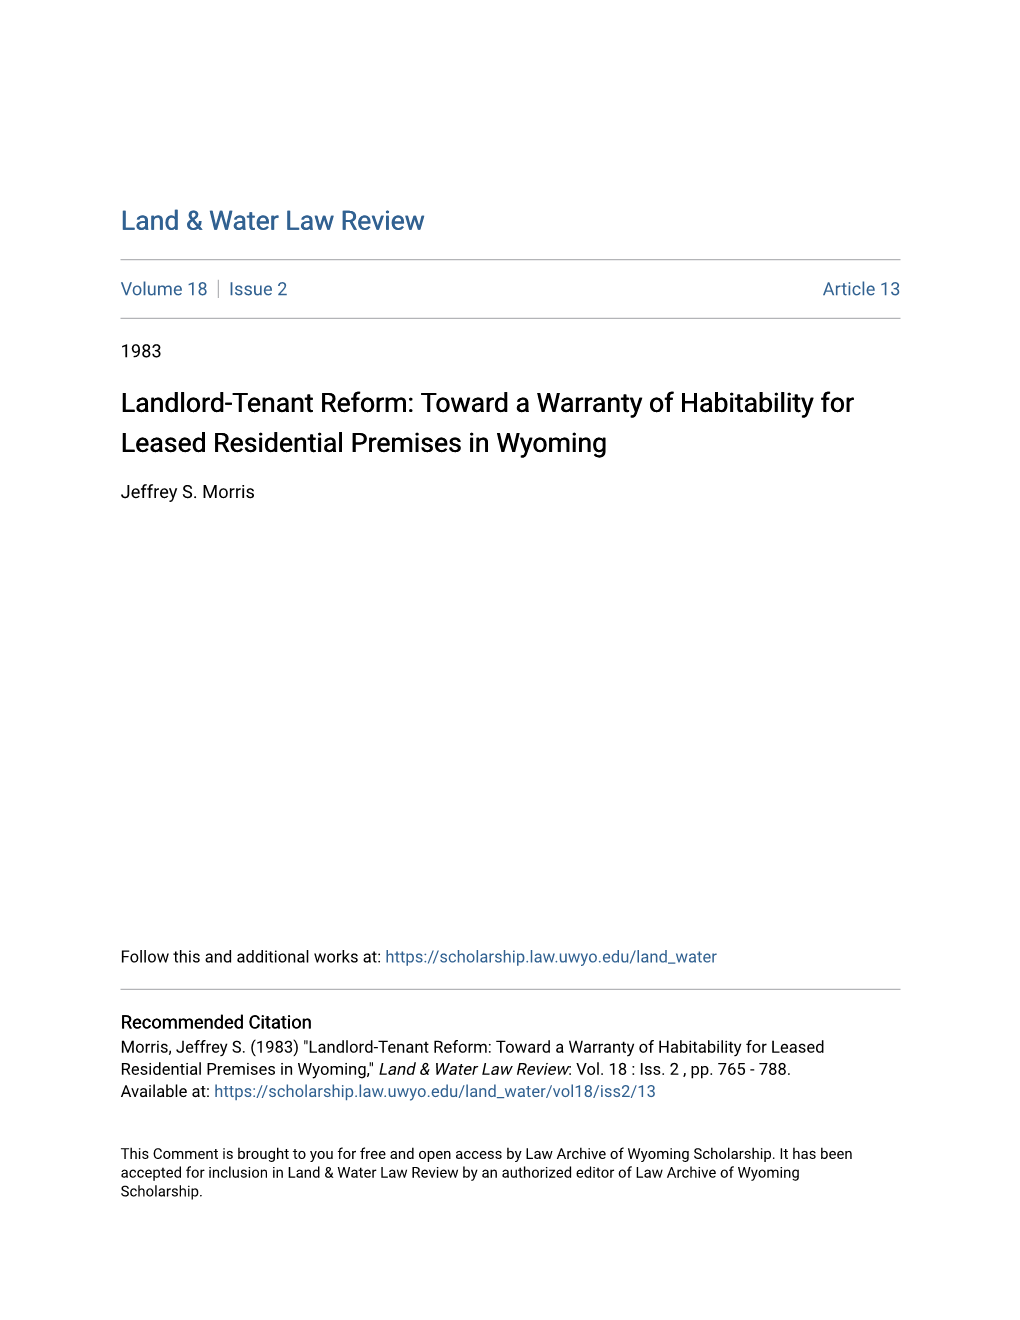 Landlord-Tenant Reform: Toward a Warranty of Habitability for Leased Residential Premises in Wyoming